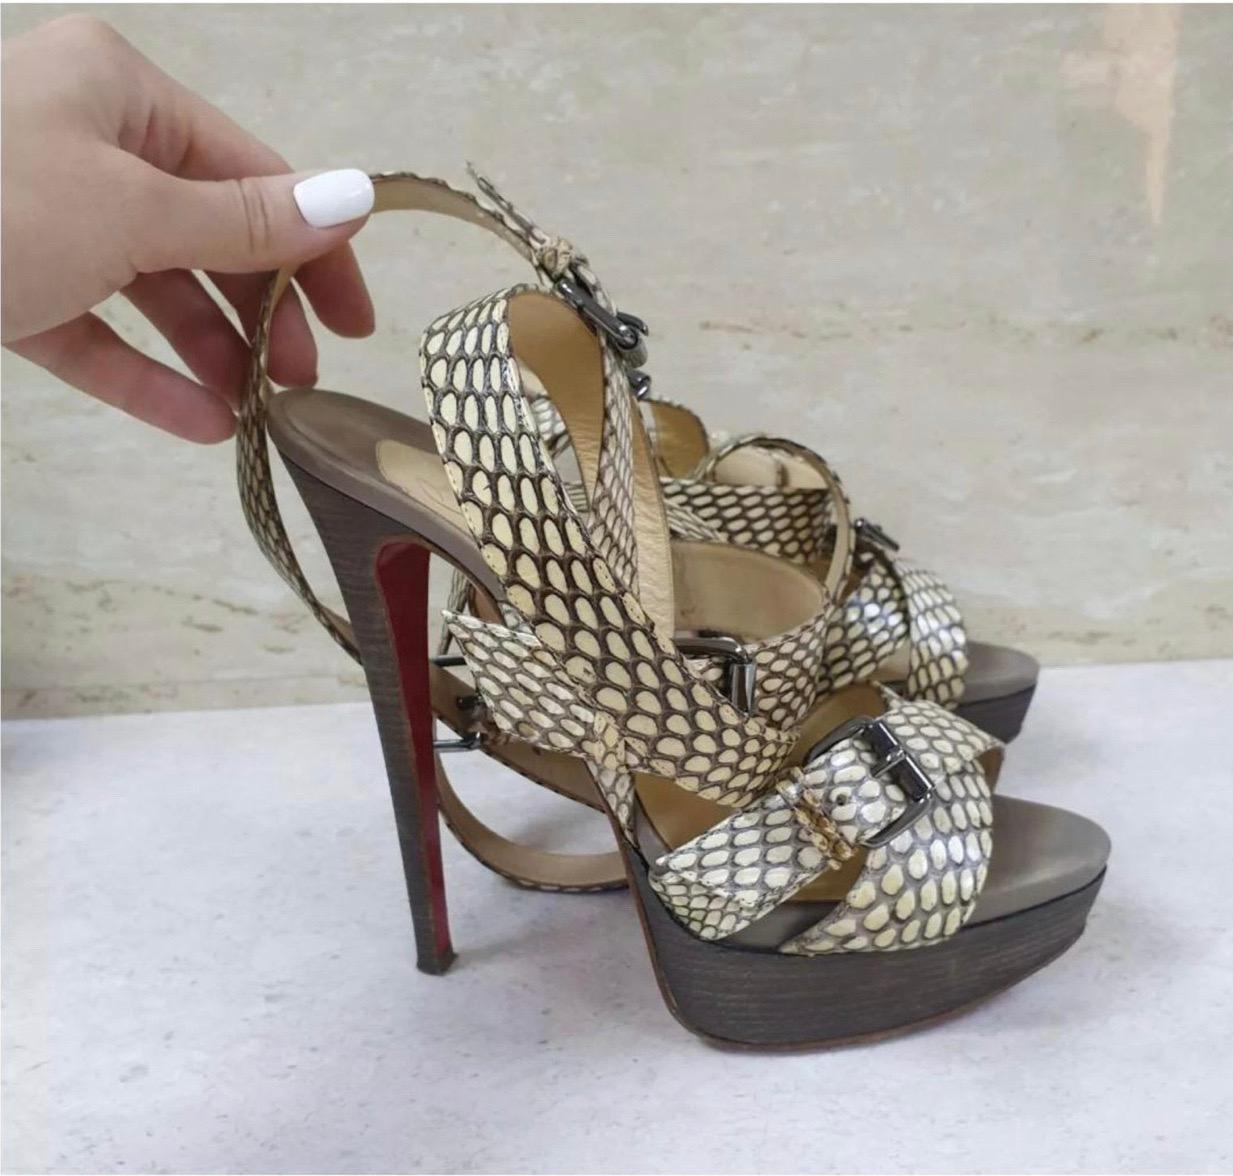 Bold yet feminine, this pair of platform sandals reflect Louboutin’s design aesthetic. They feature the iconic red soles and are complemented by strappy uppers and 14 CM HEELS. They are given a cobra skin finish and accented with silver-tone